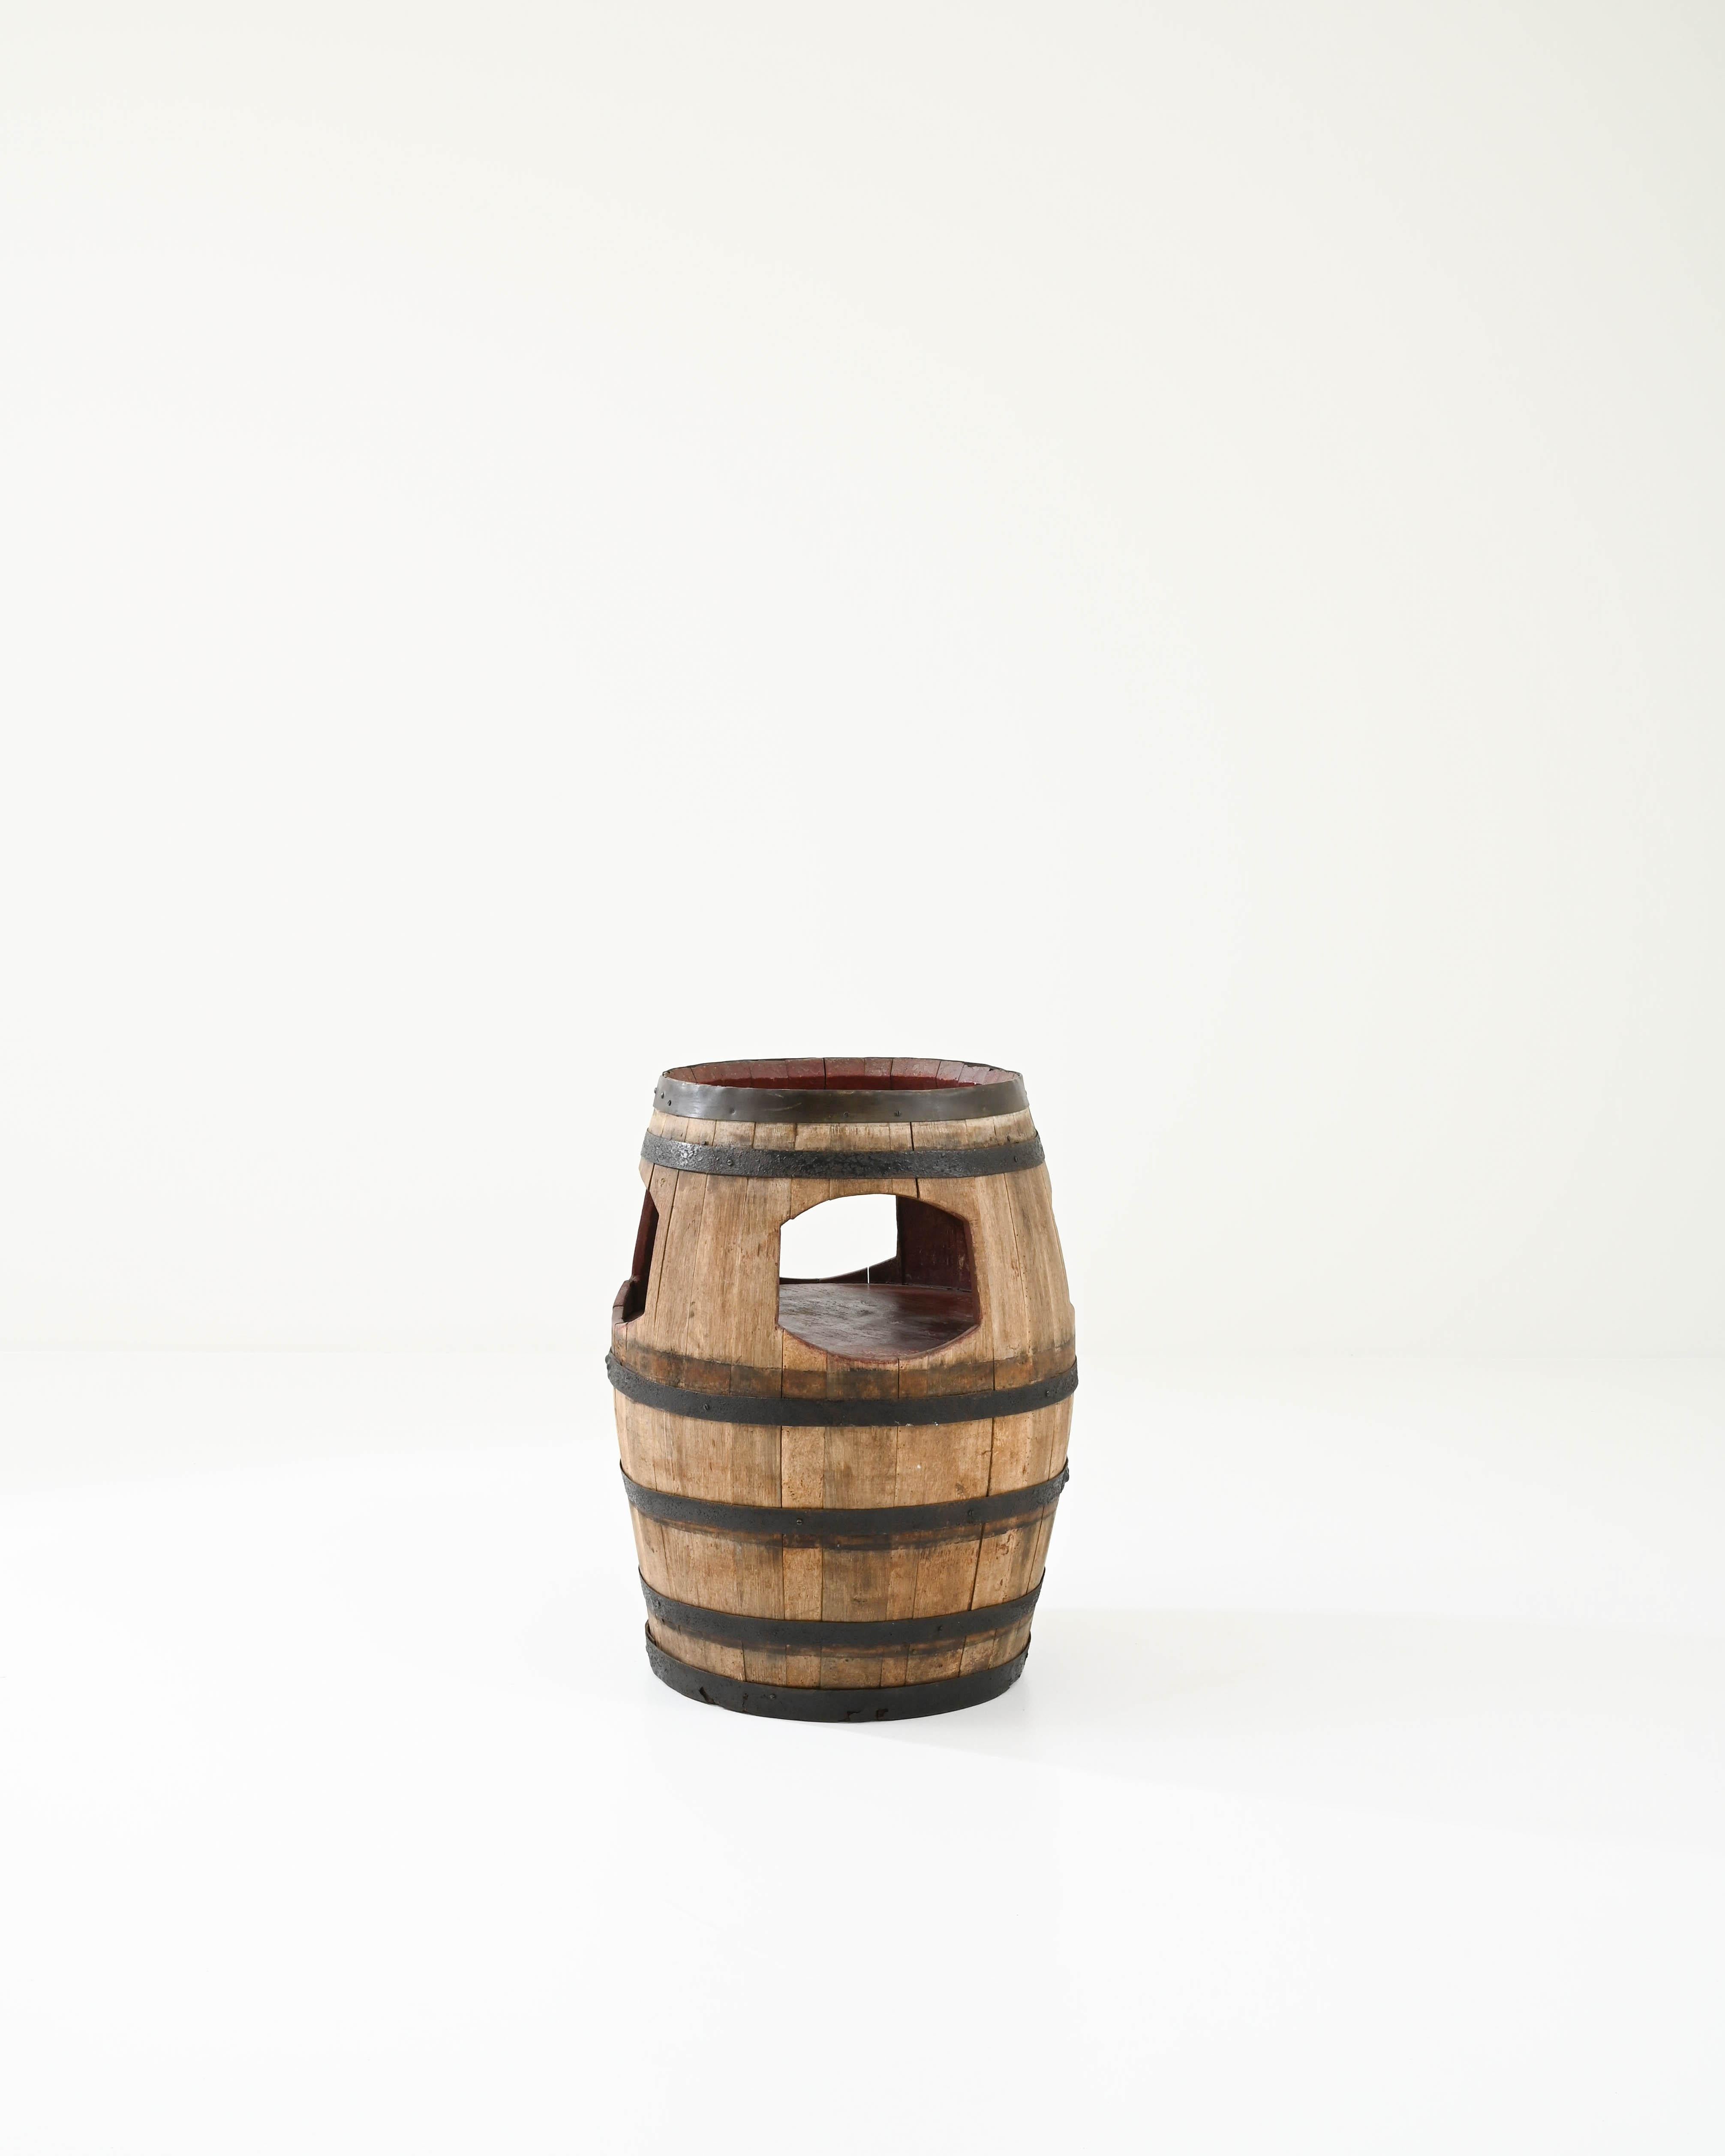 This side table was made out of an original barrel in France in the last century. Tight-grained yet flexible European oak, traditionally utilized for shaping barrels, is embraced by sound metal hoops for extra durability. A cutaway opening reveals a